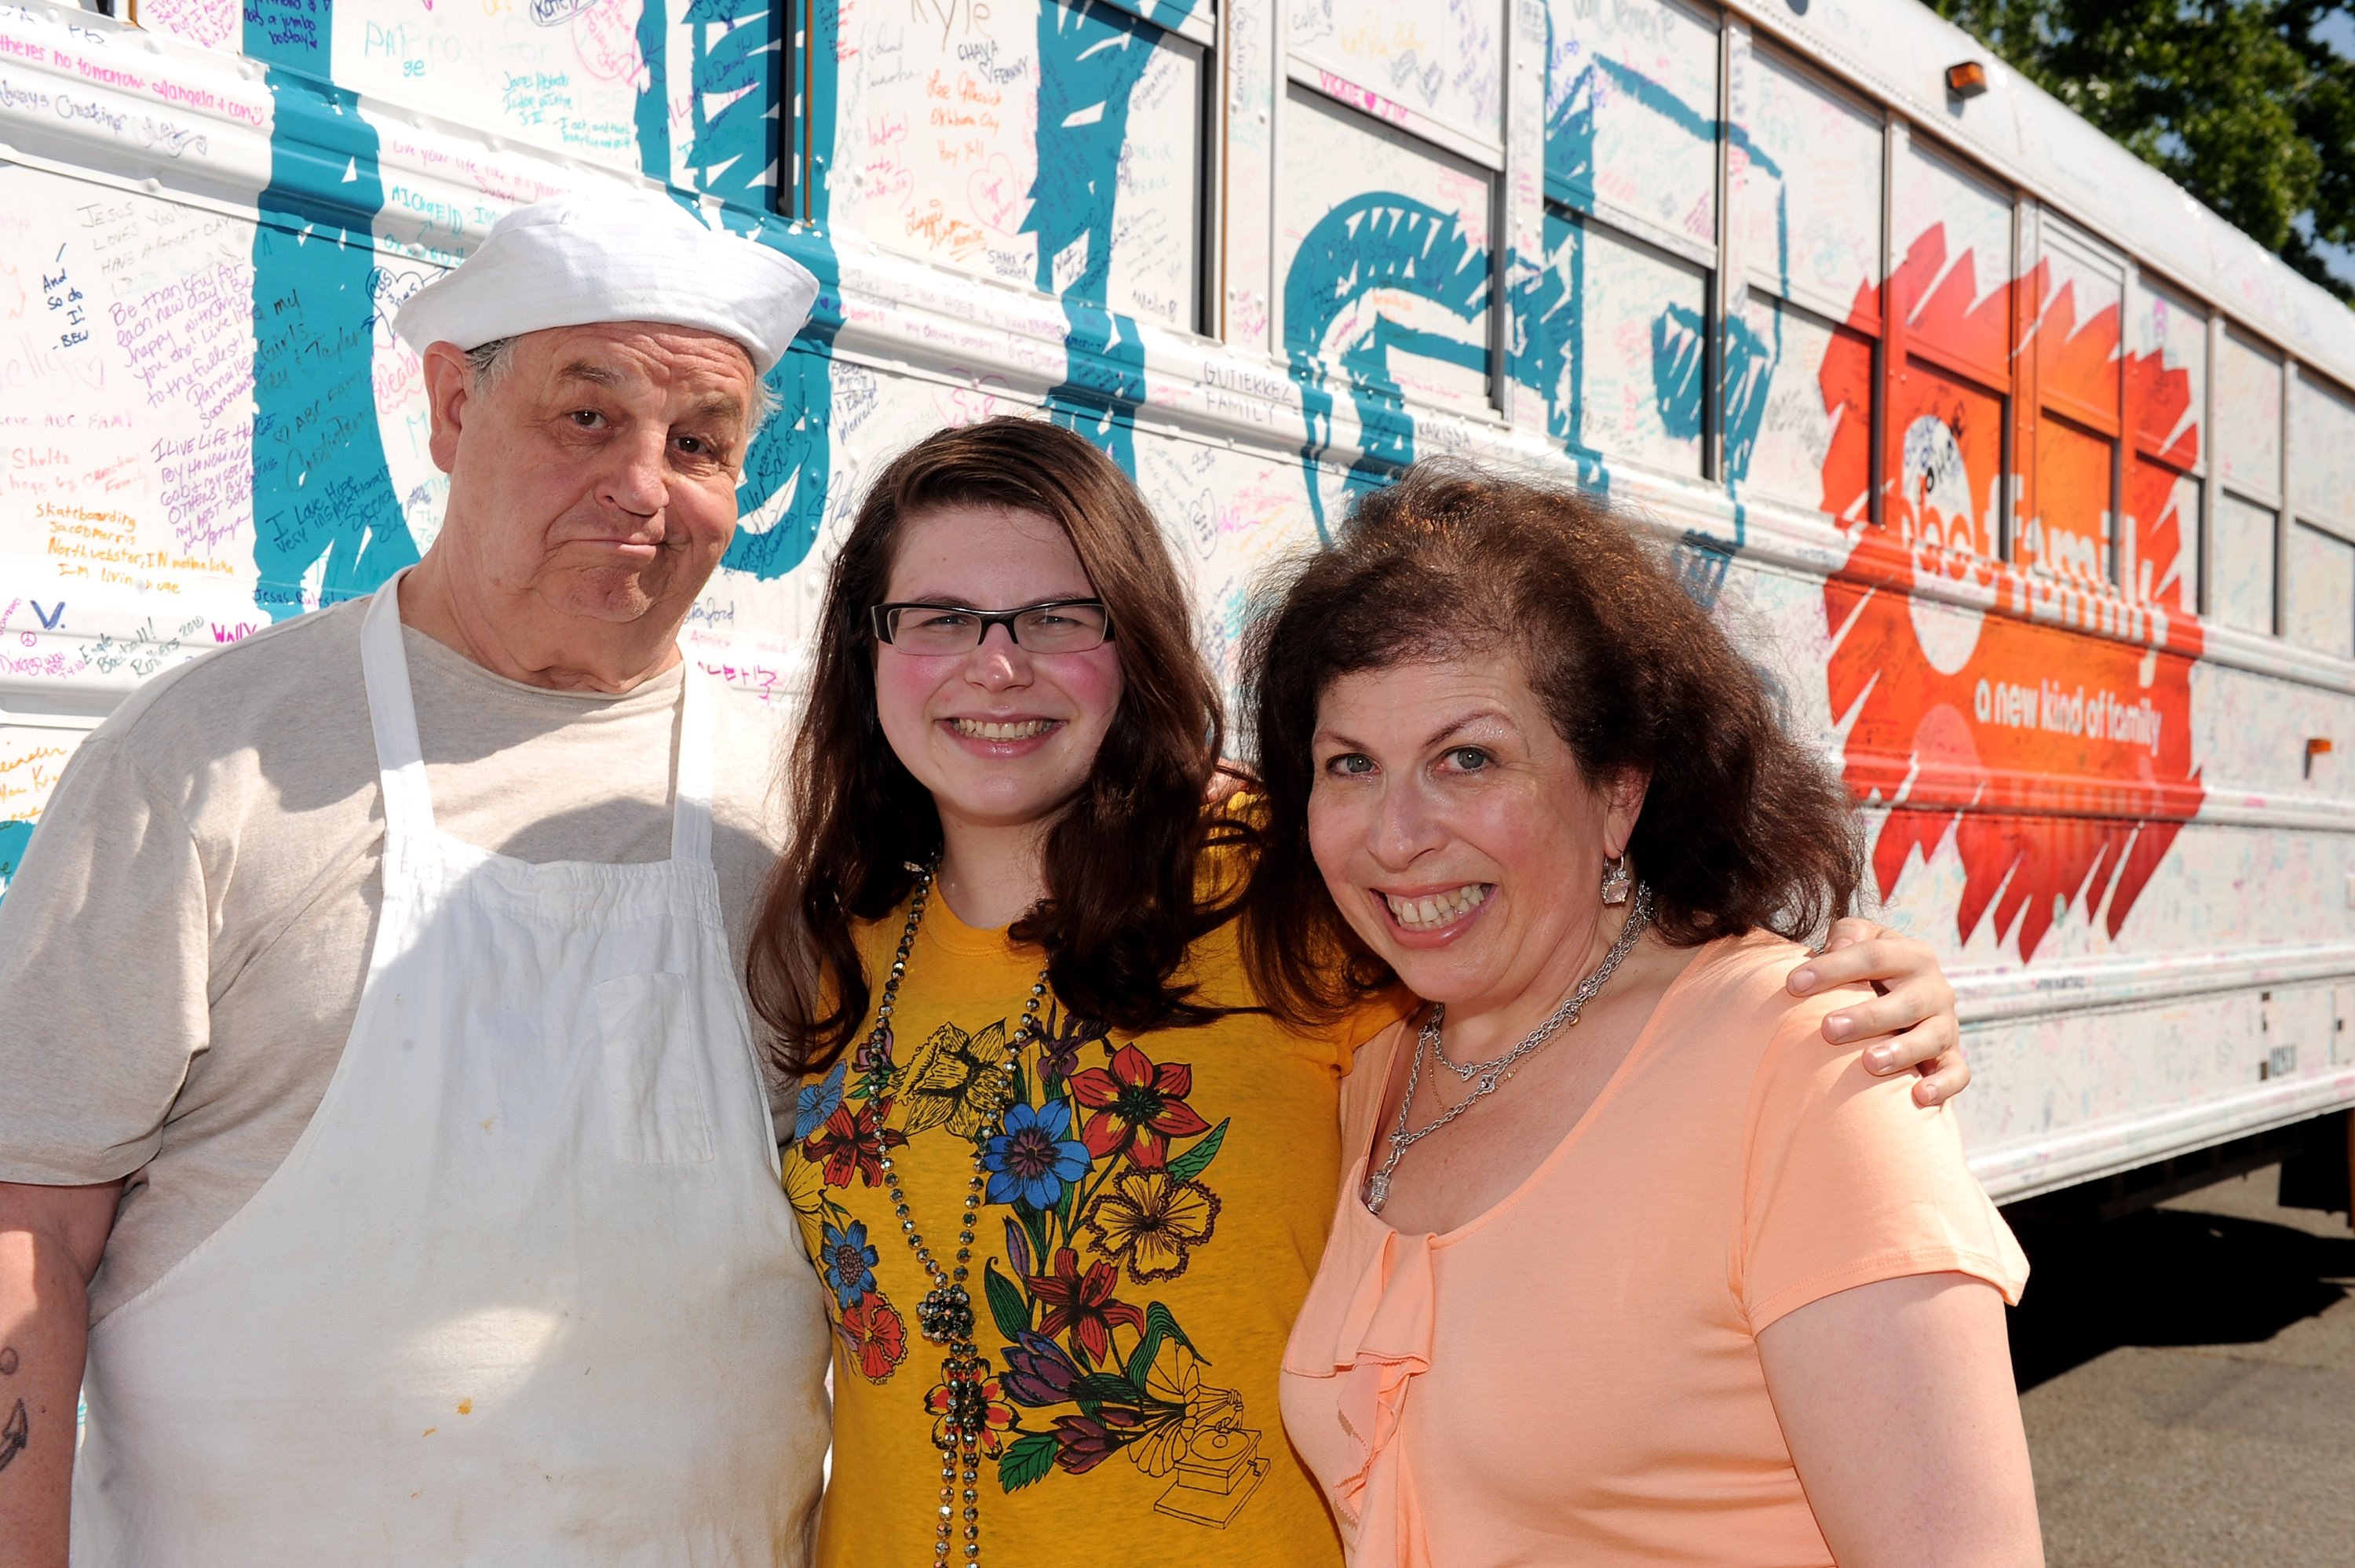 Paul Dooley, writer Savannah Dooley and writer Winnie Holzman take part in the ABC Family "Live Huge" bus campaign on July 6, 2010 in Valencia, California | Source: Getty Images 